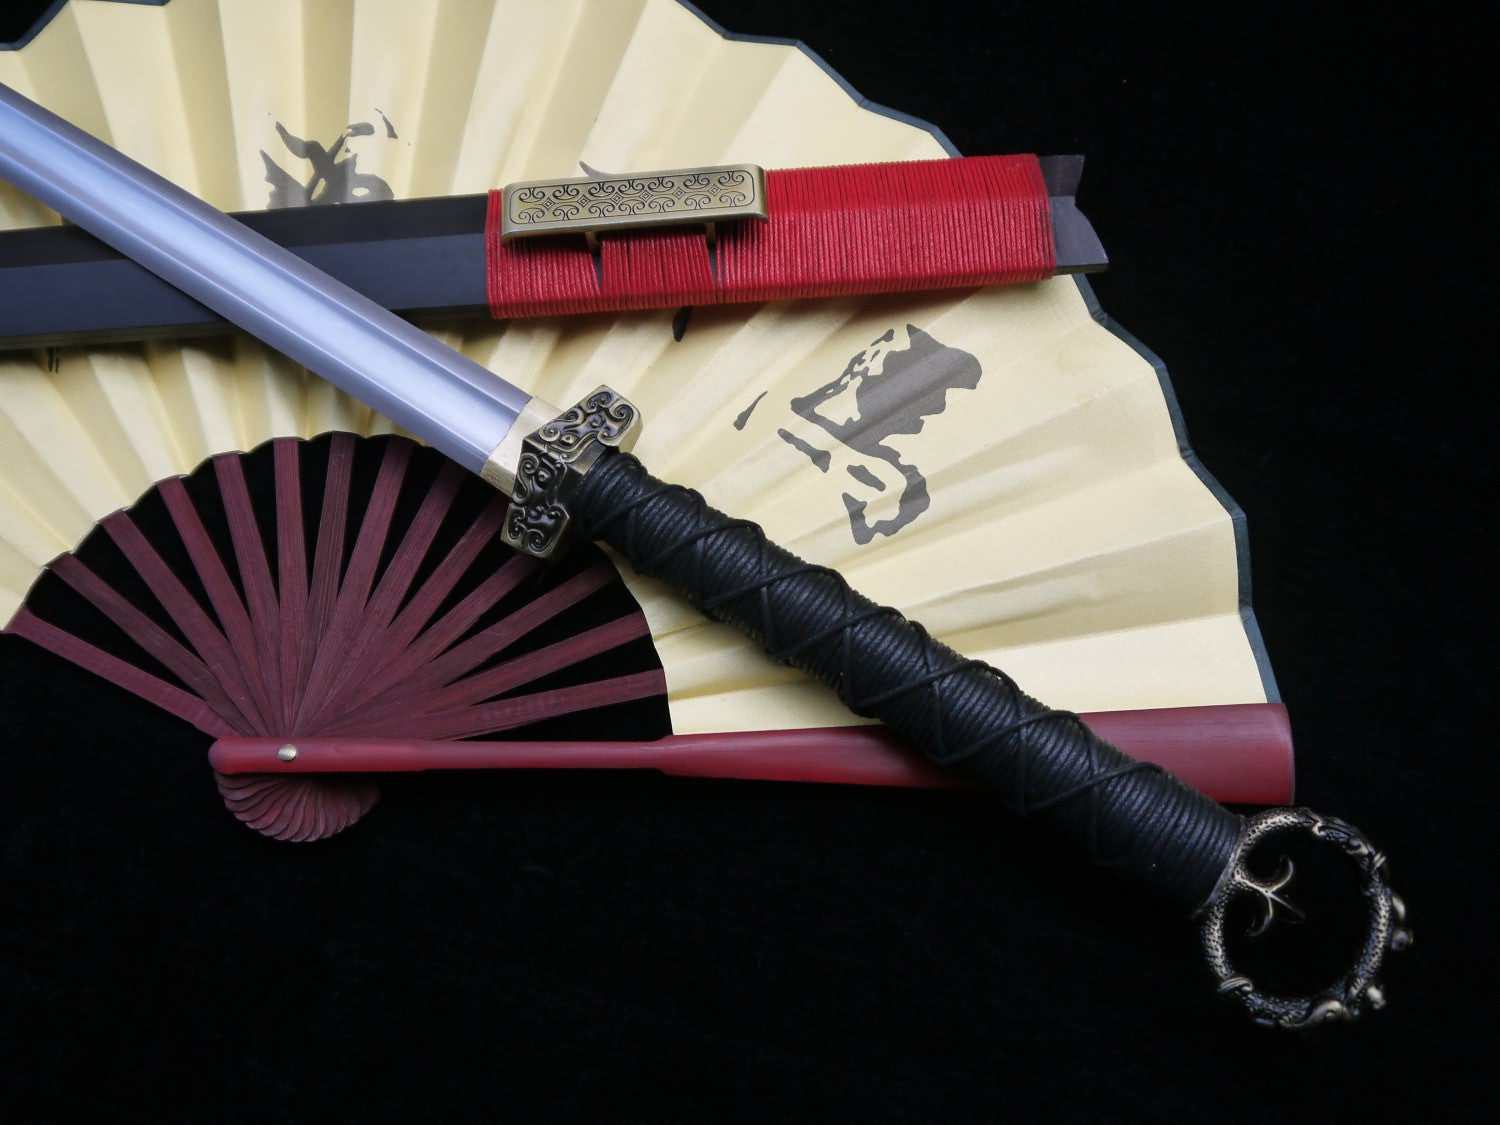 Han Dynasty sword,Damascus steel blade,Black wood,Alloy fitting,Length 37" - Chinese sword shop